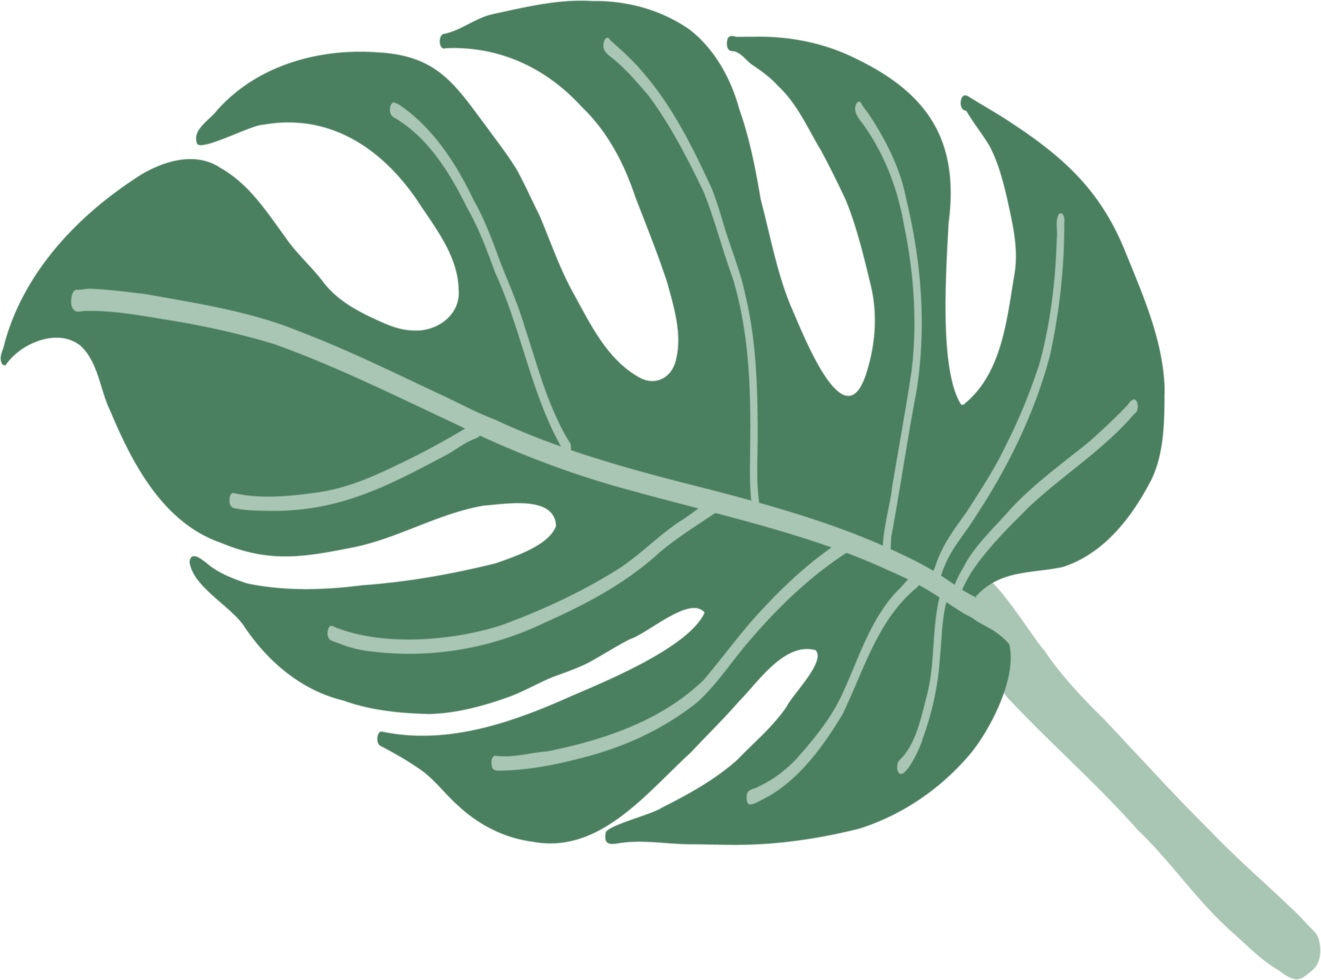 Simplicity monstera leaf freehand drawing png